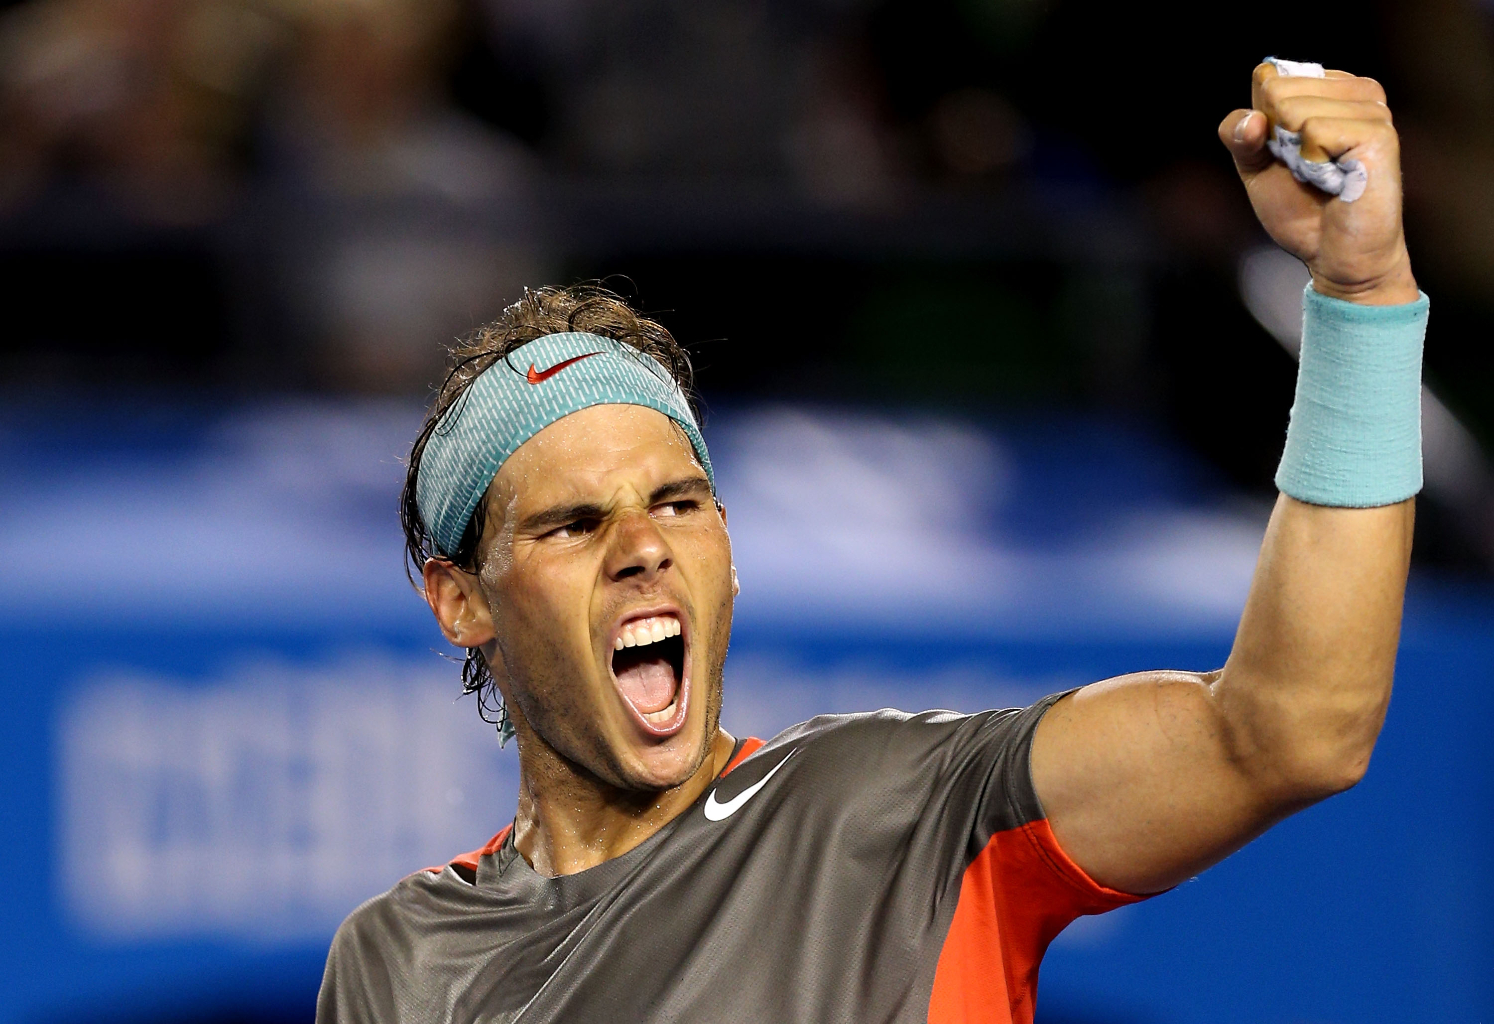 MELBOURNE, AUSTRALIA - JANUARY 24: Rafael Nadal of Spain celebrates winning his semifinal match against Roger Federer of Switzerland during day 12 of the 2014 Australian Open at Melbourne Park on January 24, 2014 in Melbourne, Australia. (Photo by Clive Brunskill/Getty Images)